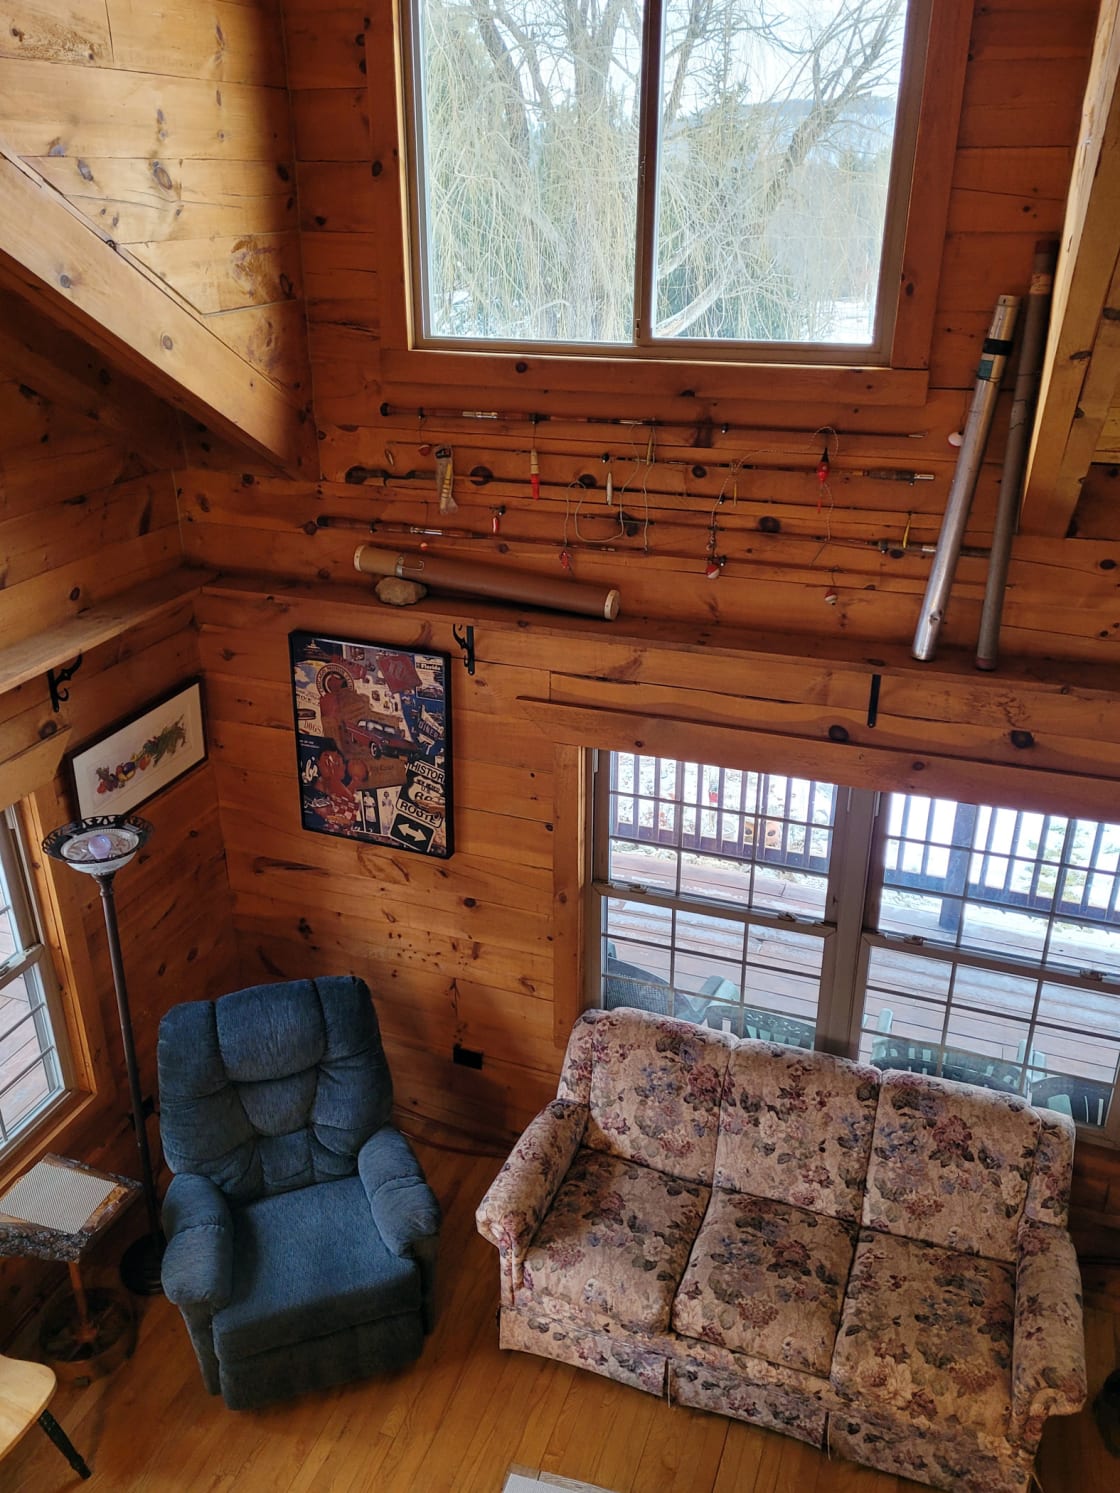 Looking down from 2nd floor sleeping loft to living room area. Antique fishing poles and original art grace the cabin. View out window is the Kickapoo Valley Reserve State Park.